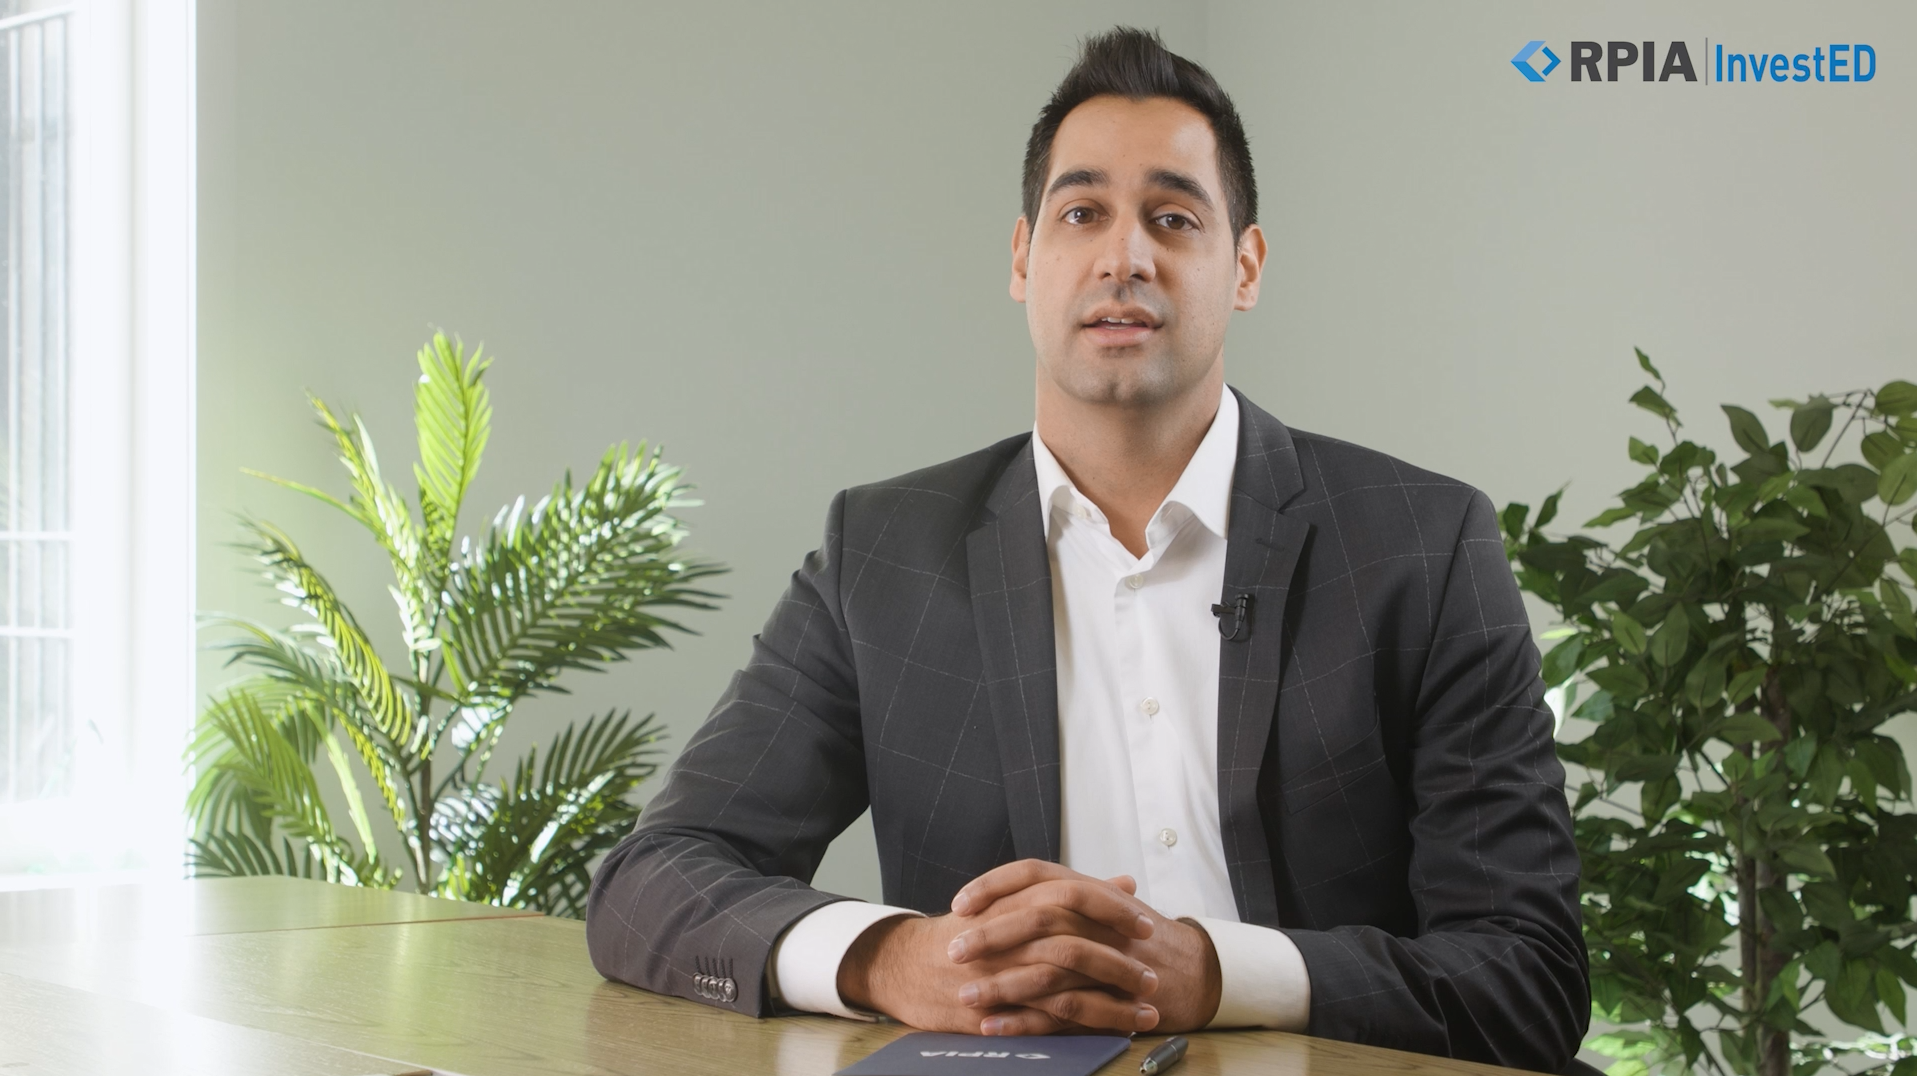 Imran Dhanani in a boardroom with  plants in the background